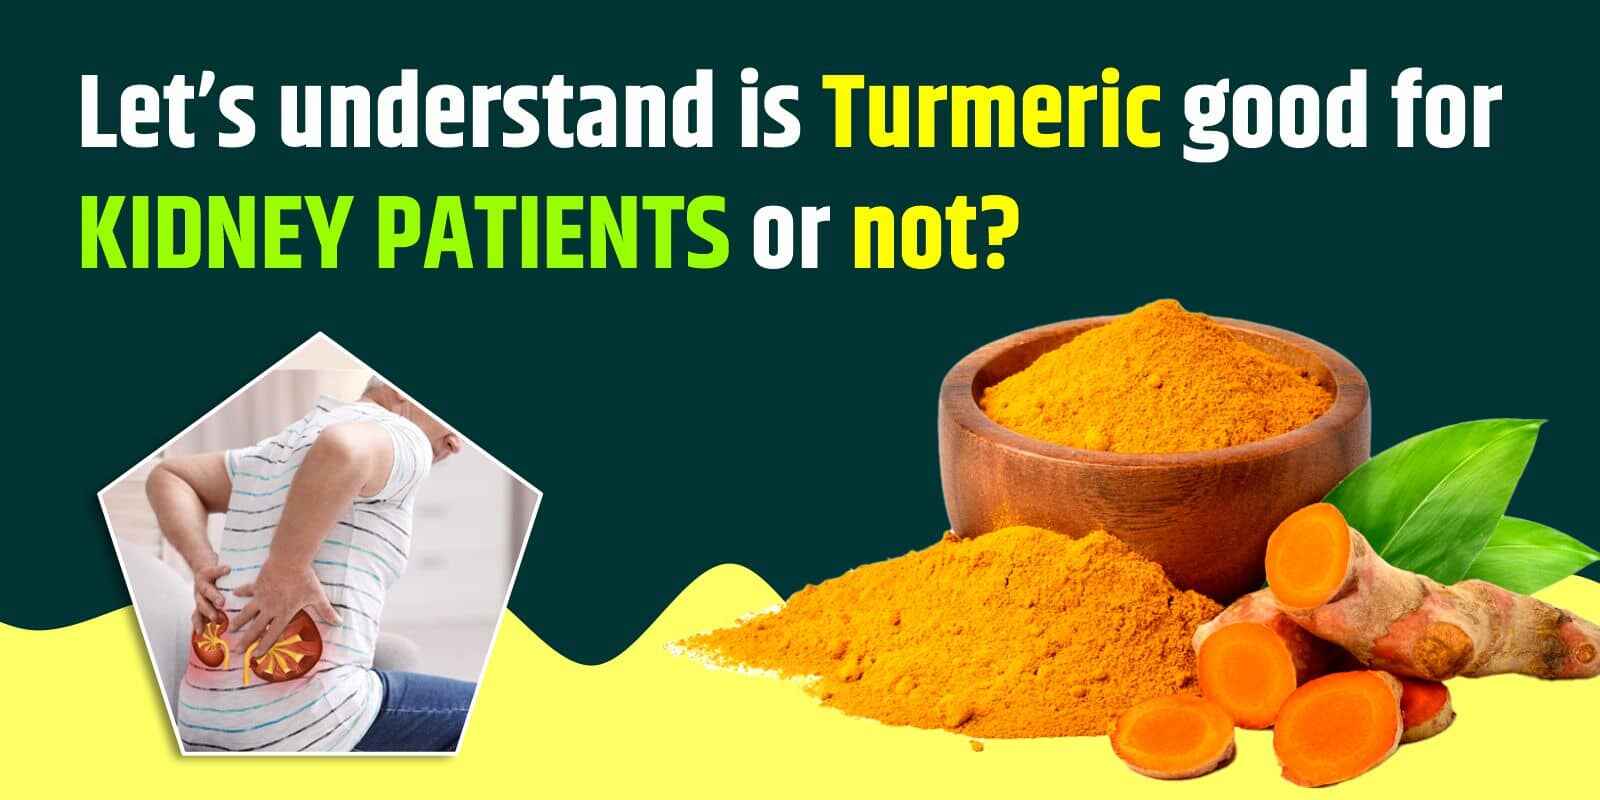 Let’s understand is Turmeric good for kidney patients or not?